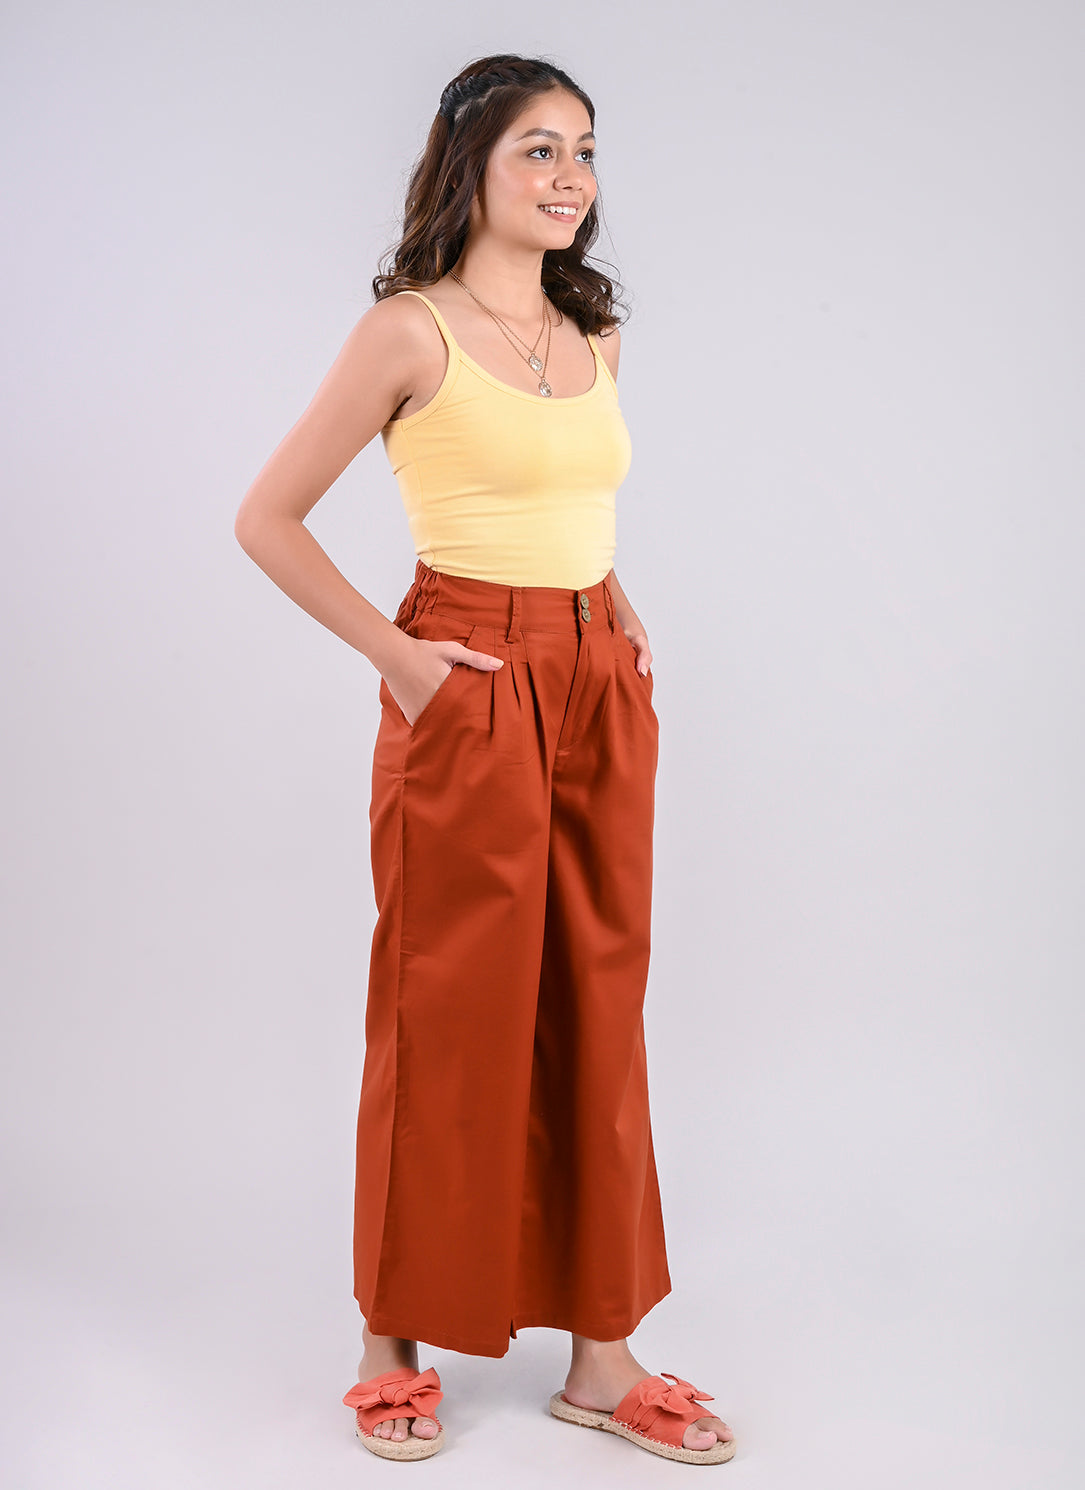 PLEATED PALAZZO PANTS IN PUMPKIN SPICE